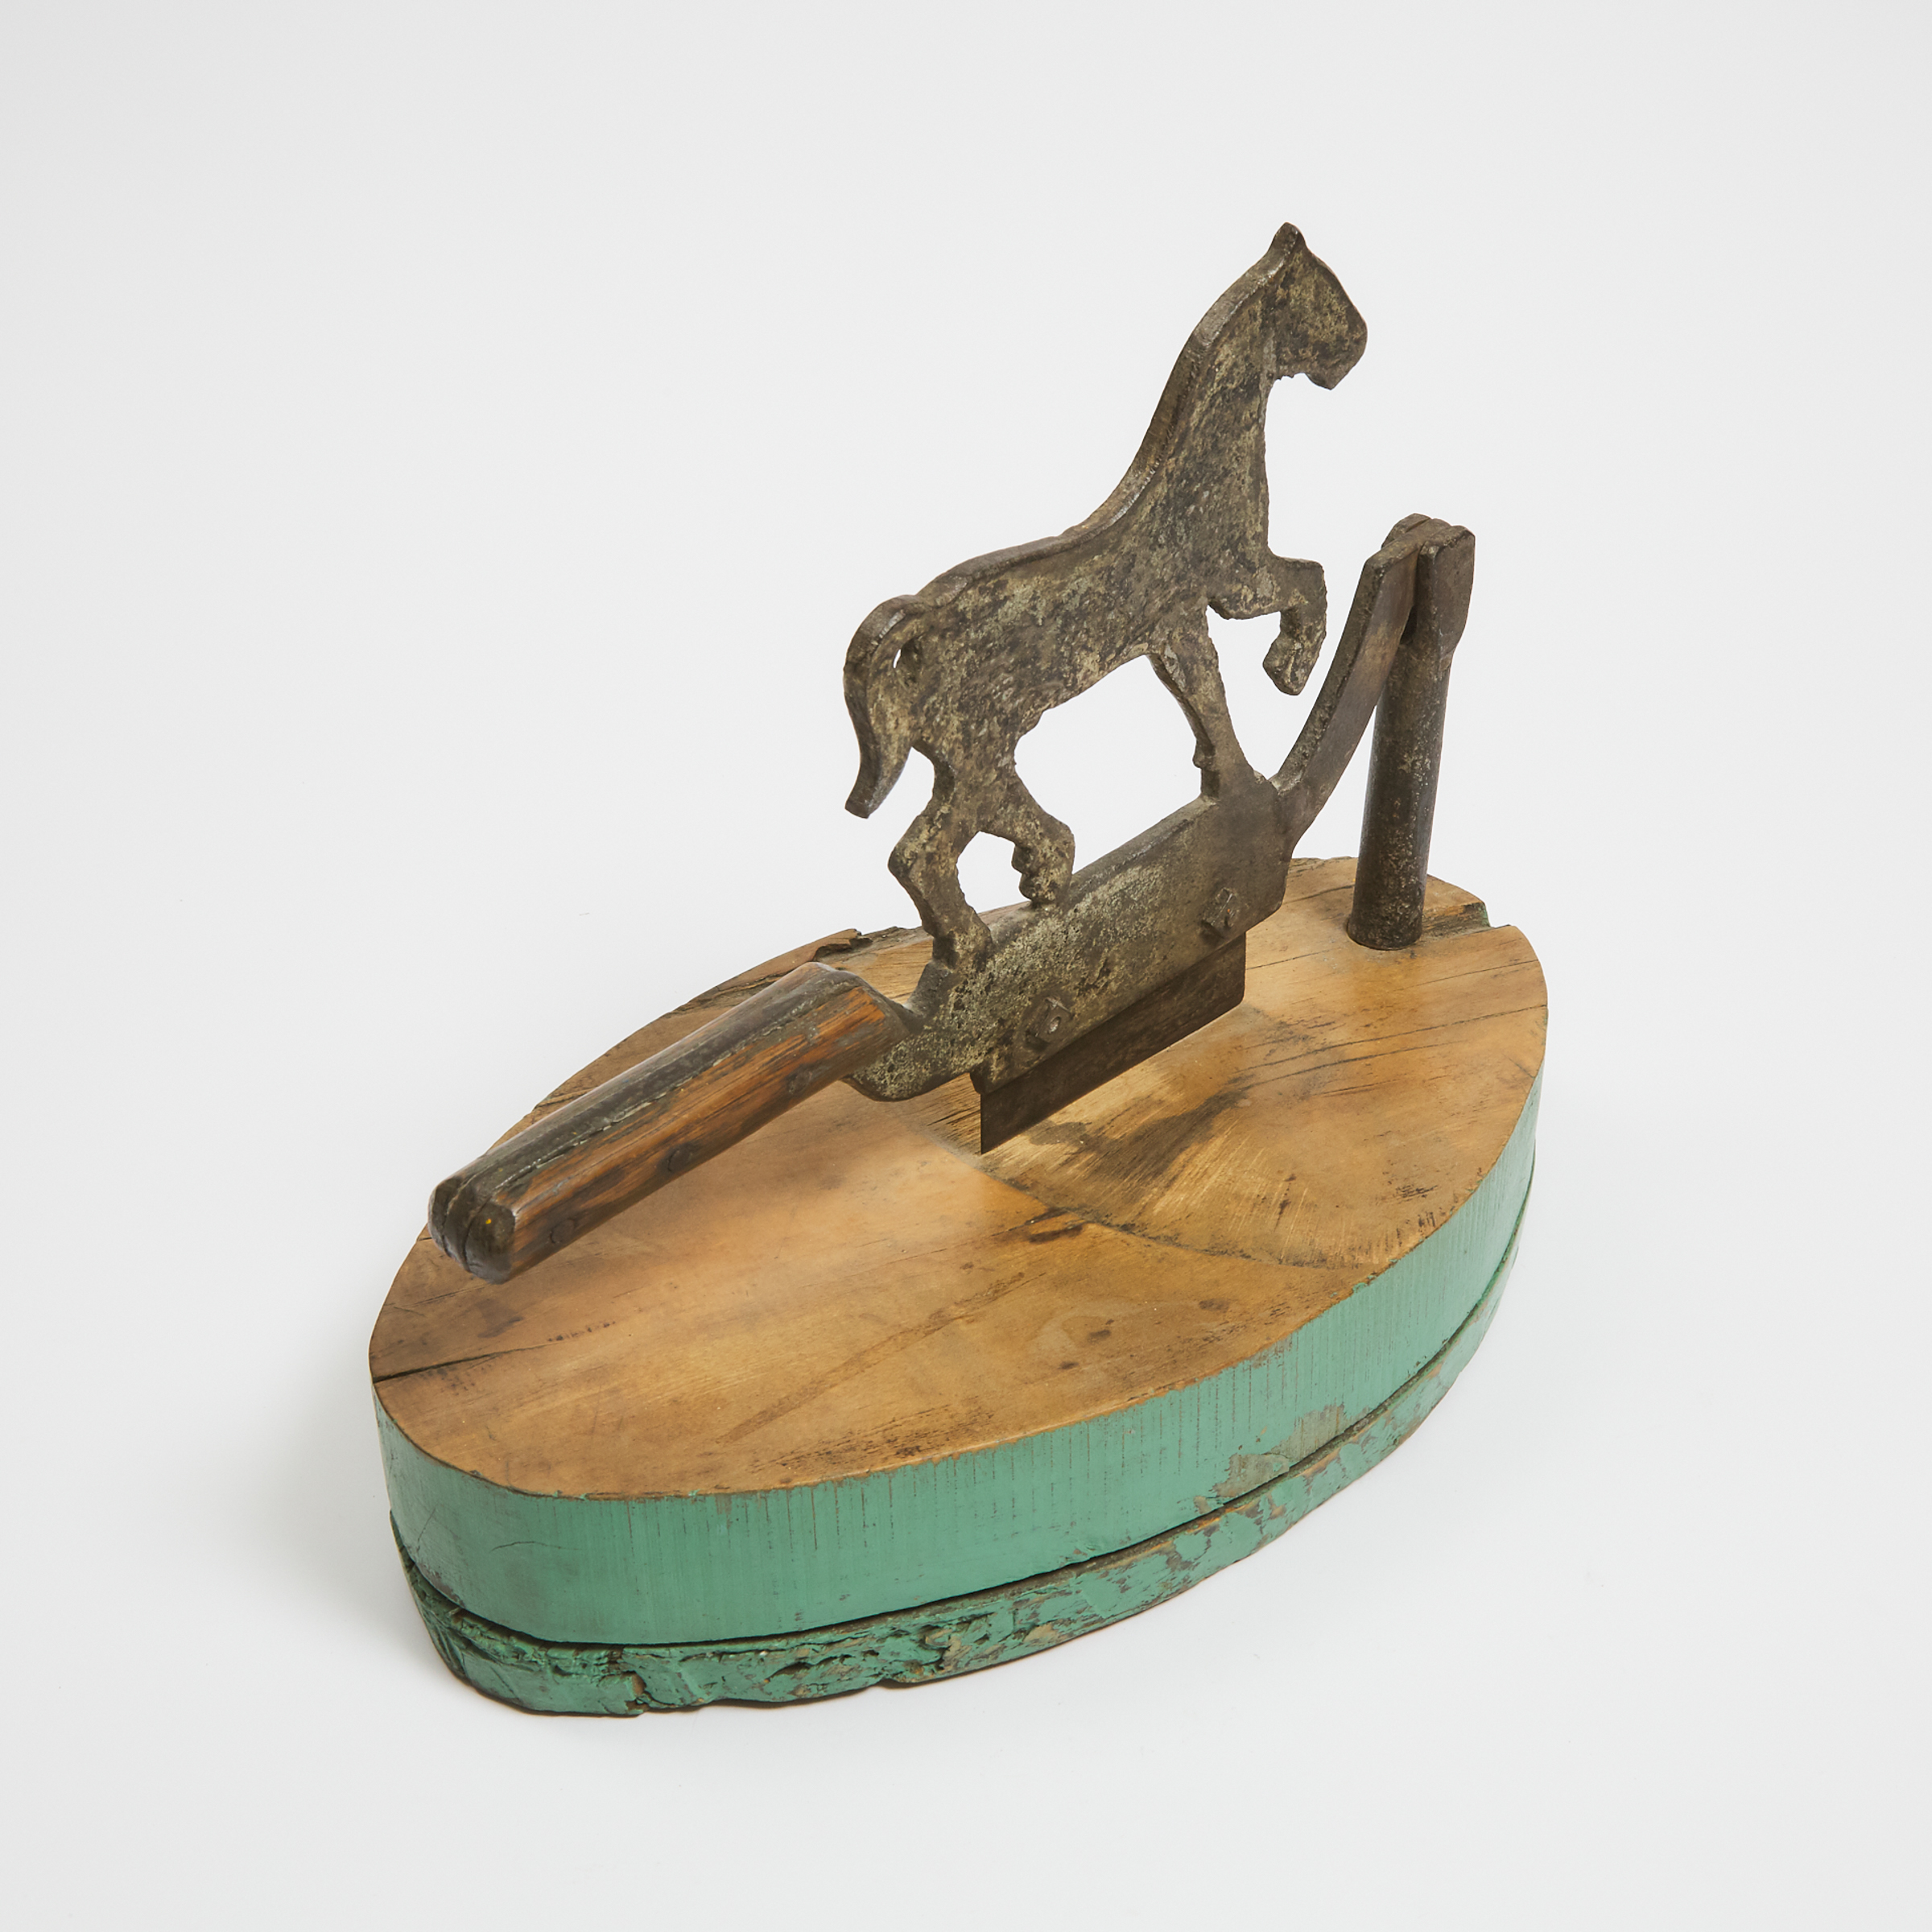 QUEBEC PAINTED IRON AND WOOD HORSE FORM TOBACCO CUTTER, 19th CENTURY